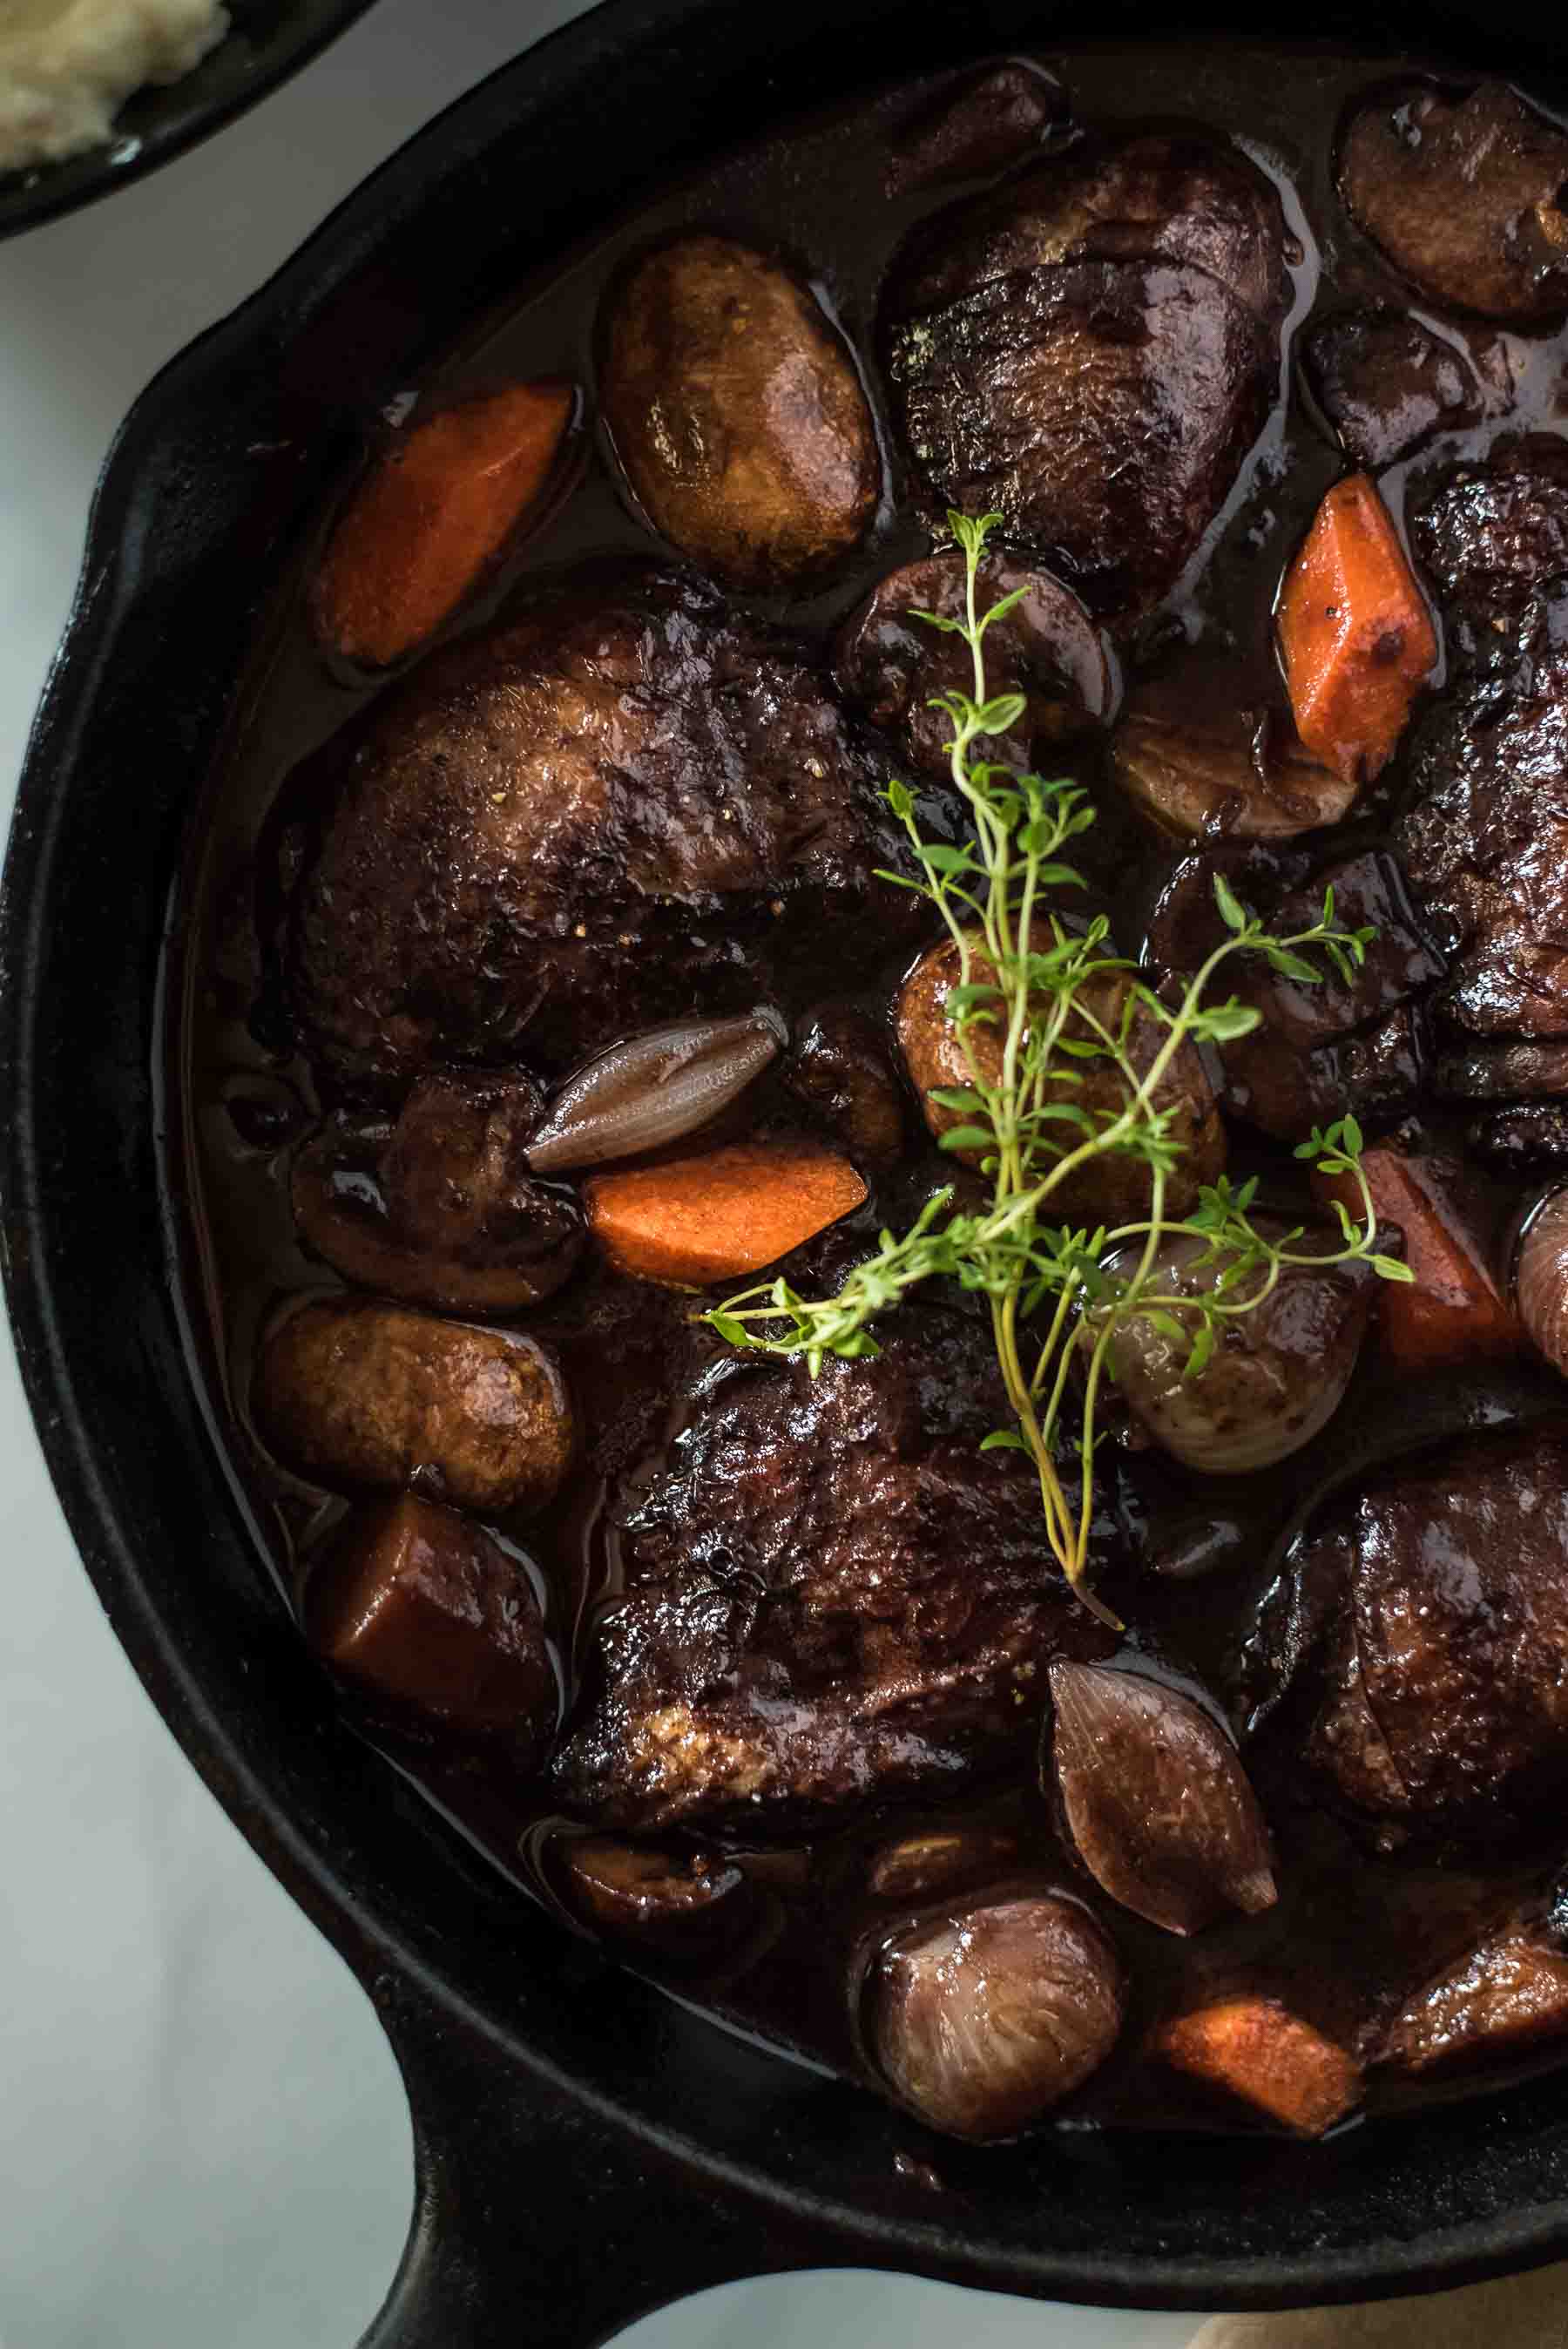 No fear - this classic Coq Au Vin recipe is not nearly as difficult as you might think! Wine-marinated chicken, onions, mushrooms, and carrots are slow simmered in a deliciously rich French red wine sauce, and will be the highlight of your week at the dinner table!